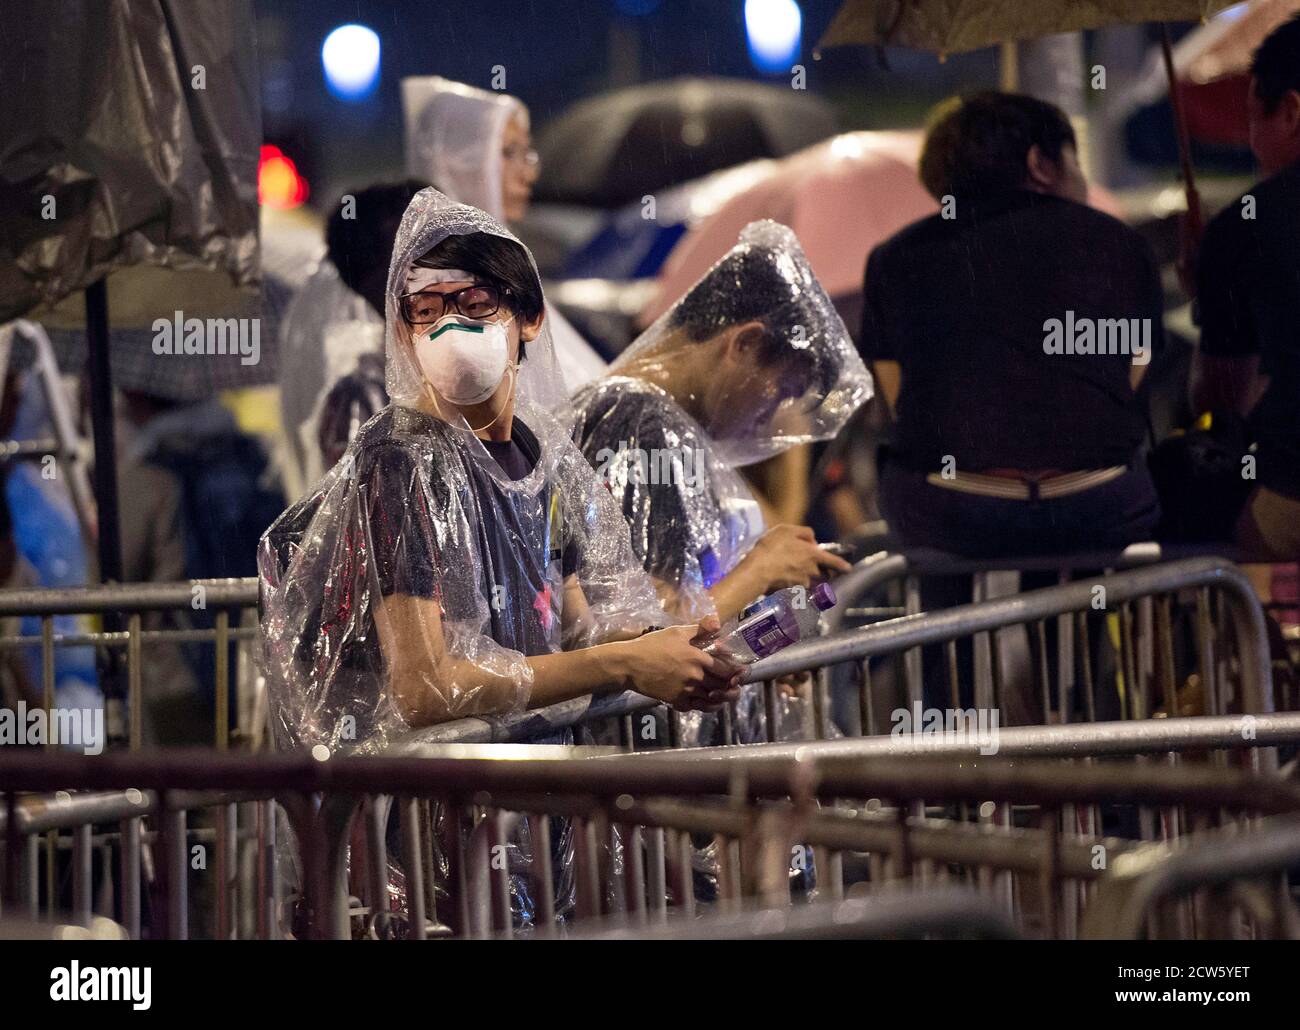 Hong Kong, Hong Kong, China. 4th Oct, 2014. Protesters, prepared to face pepper spray, outside the Chief Executives office in the LegCo building, Tamar, Admiralty. Students maintain their pro-democracy sit-in while police take no action to stop them. Credit: Jayne Russell/ZUMA Wire/Alamy Live News Stock Photo